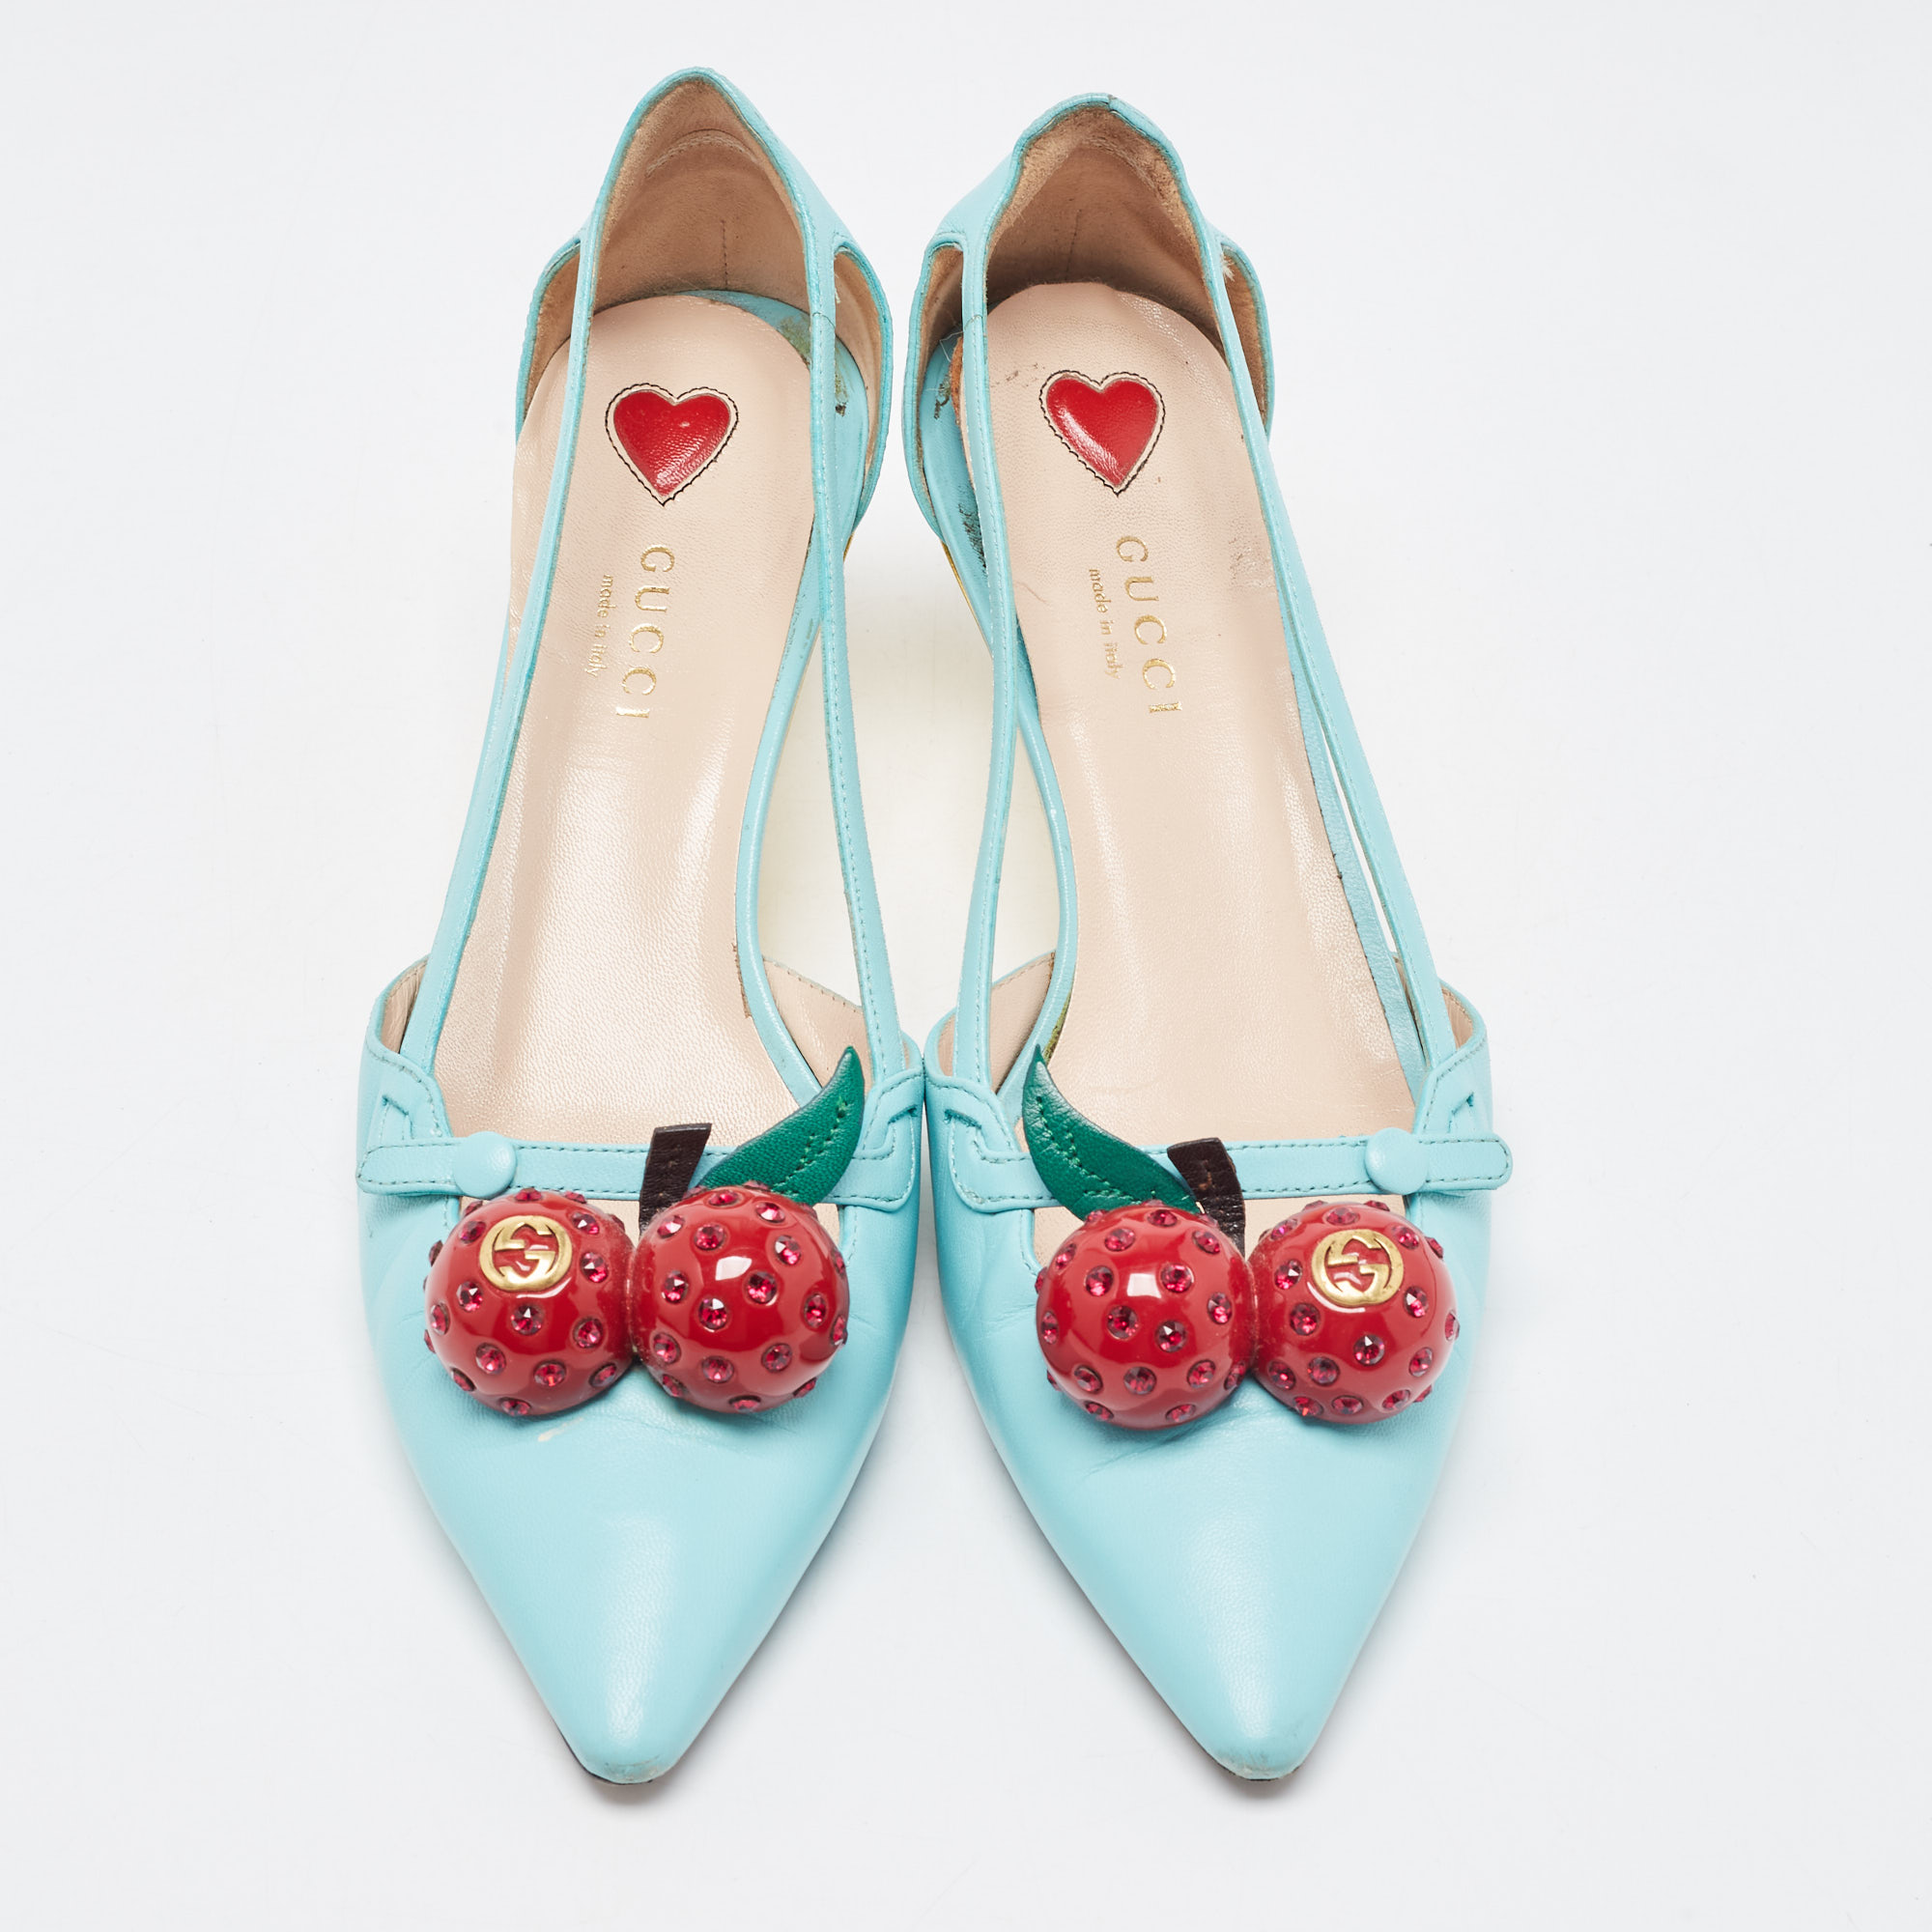 Gucci Blue Leather Unia Pointed Toe Pumps Size 36.5